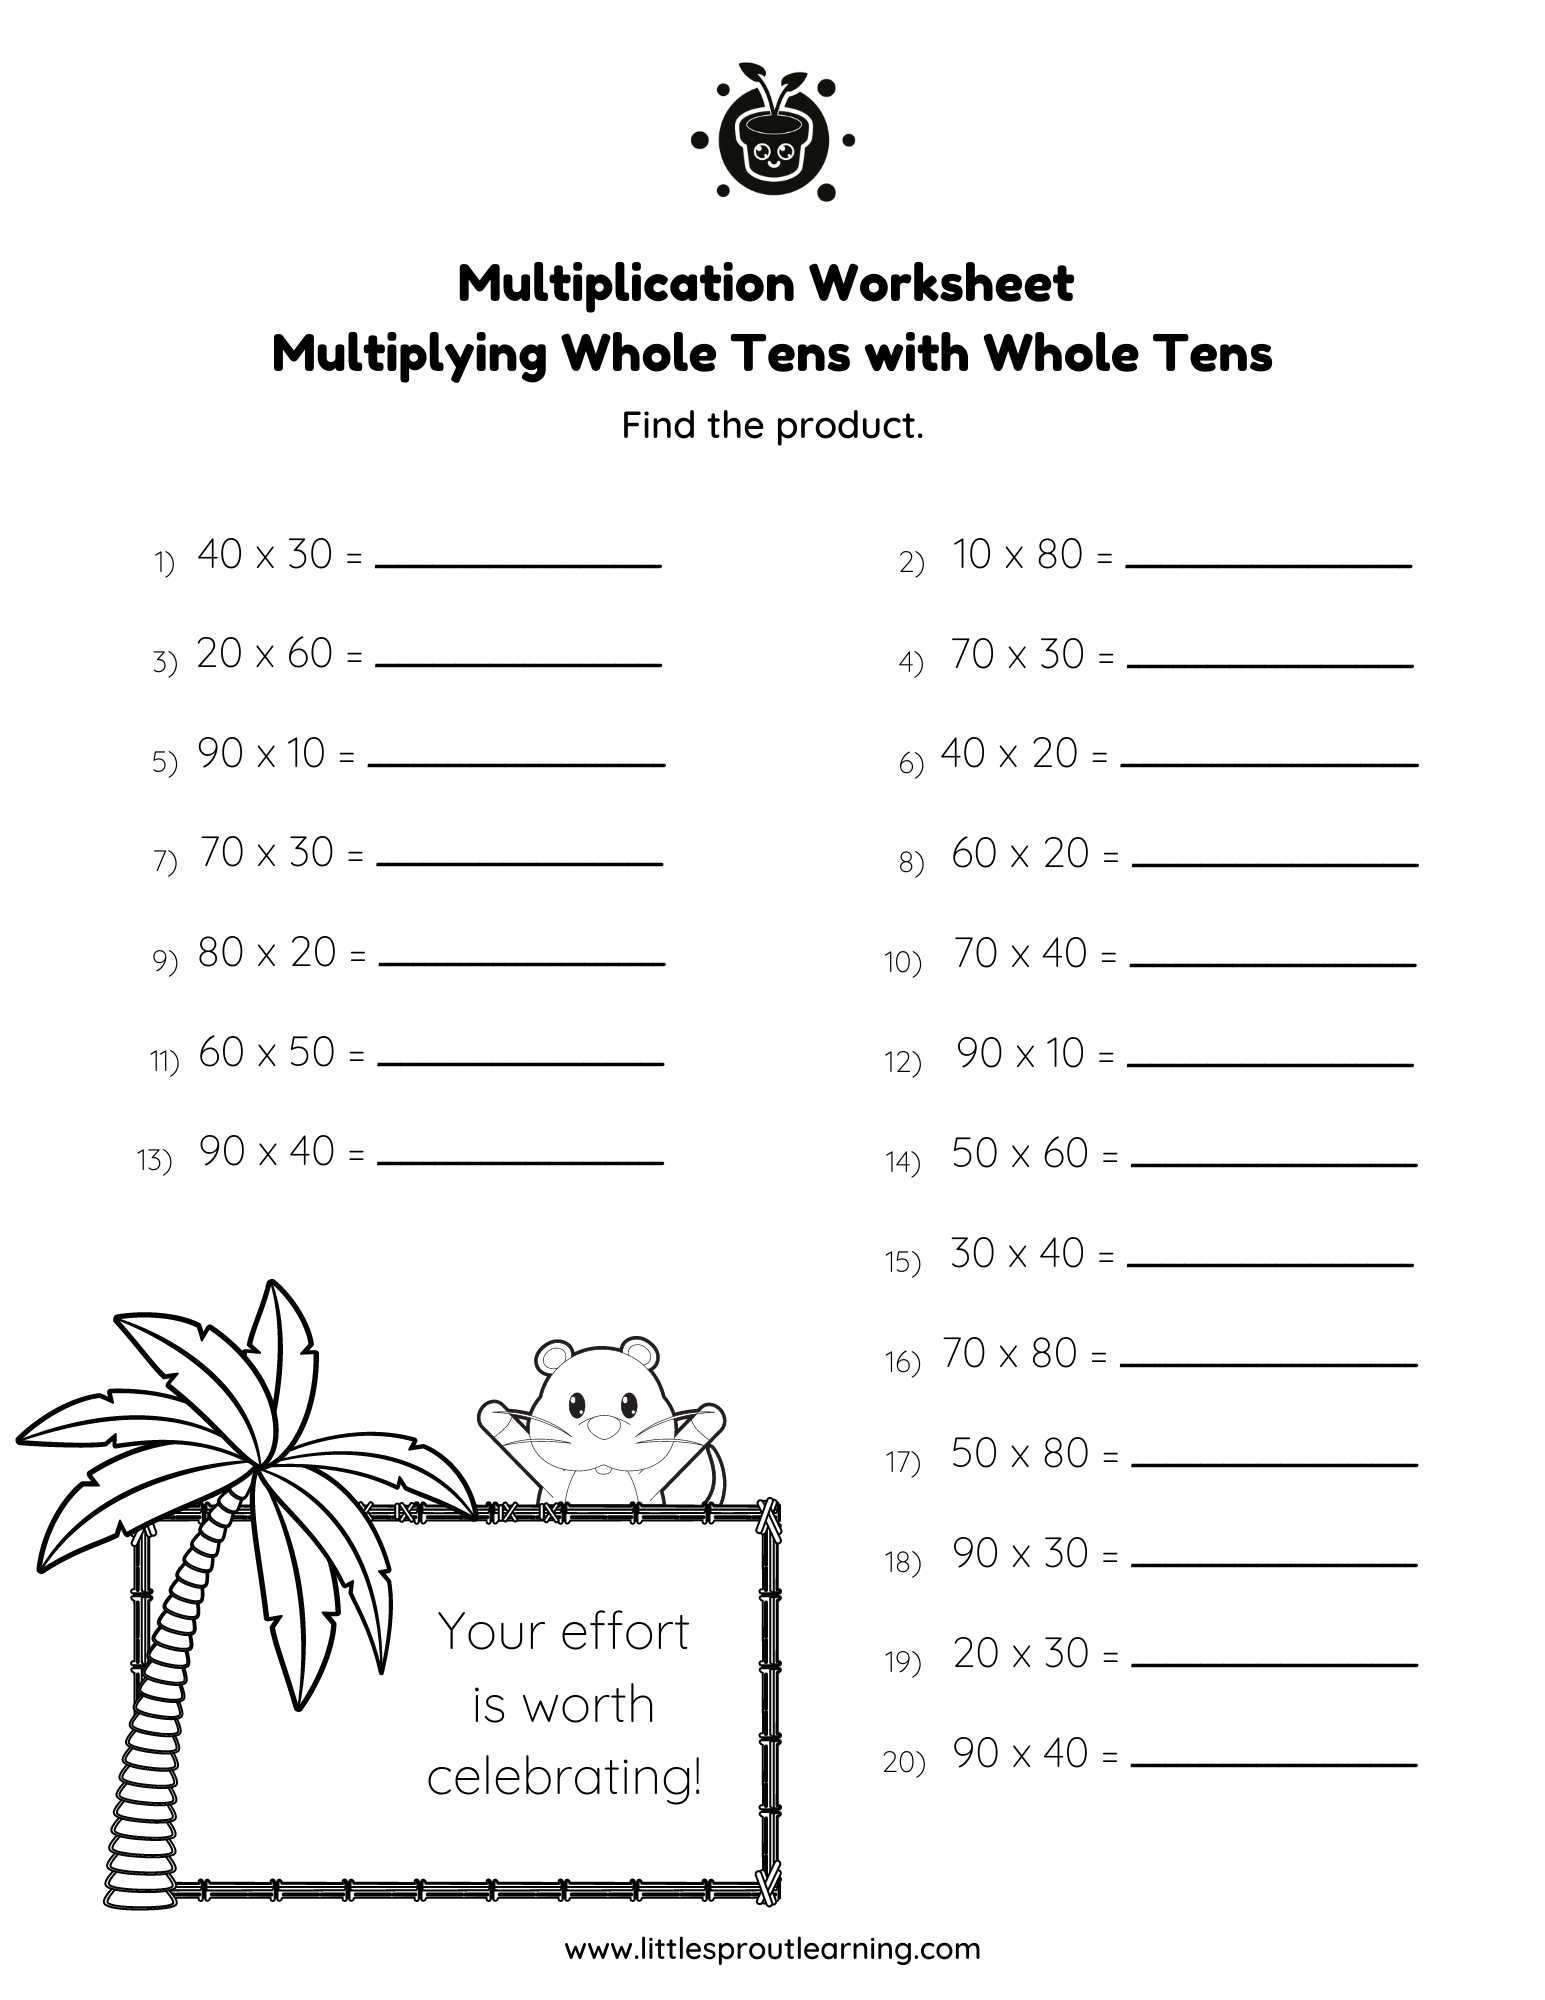 Math Worksheet Practice and multiplication worksheets Whole Tens